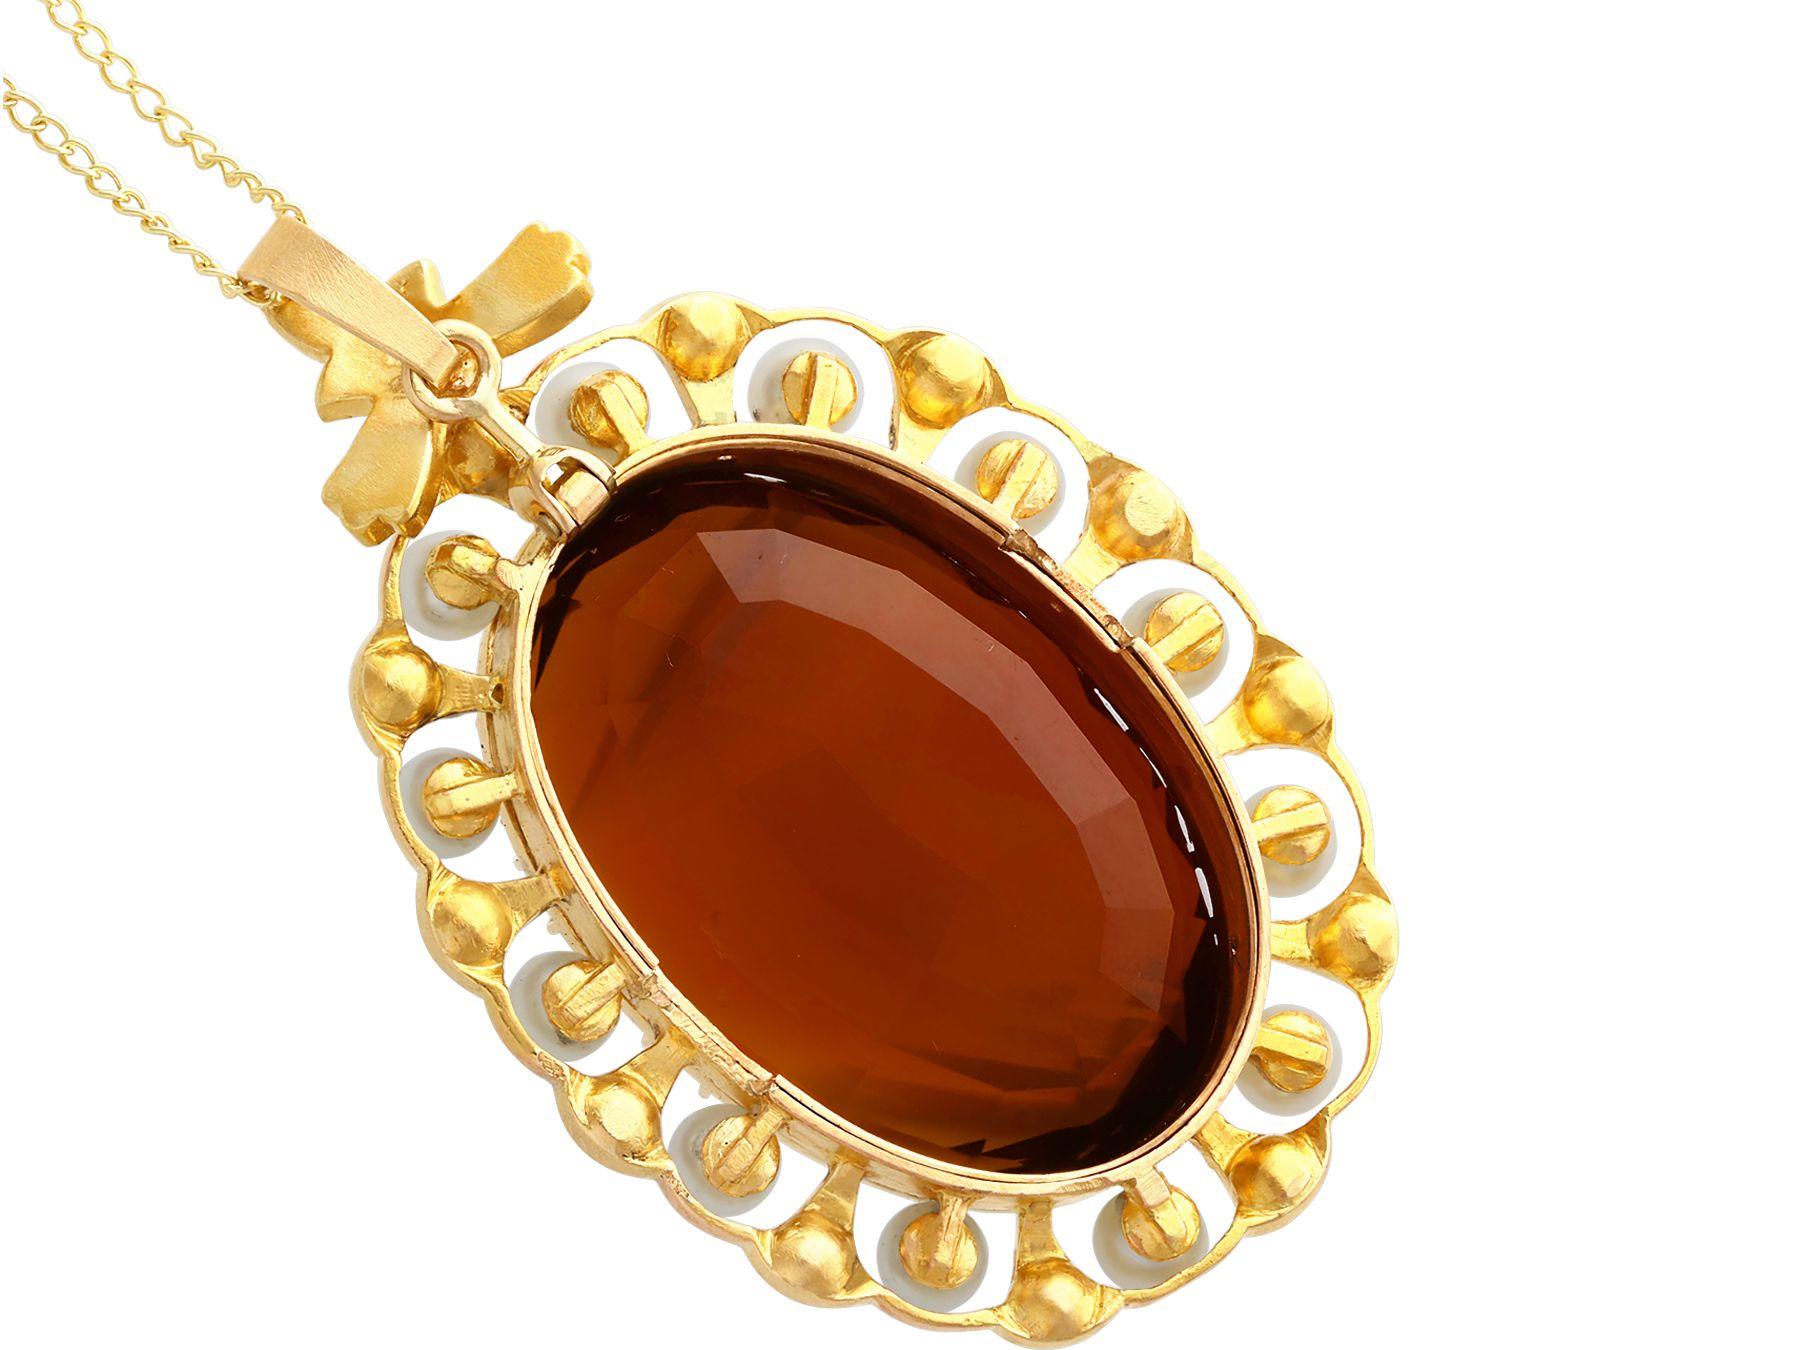 Antique 49.55 Carat Citrine 1.06 Carat Diamond Pearl and Yellow Gold Pendant In Excellent Condition For Sale In Jesmond, Newcastle Upon Tyne